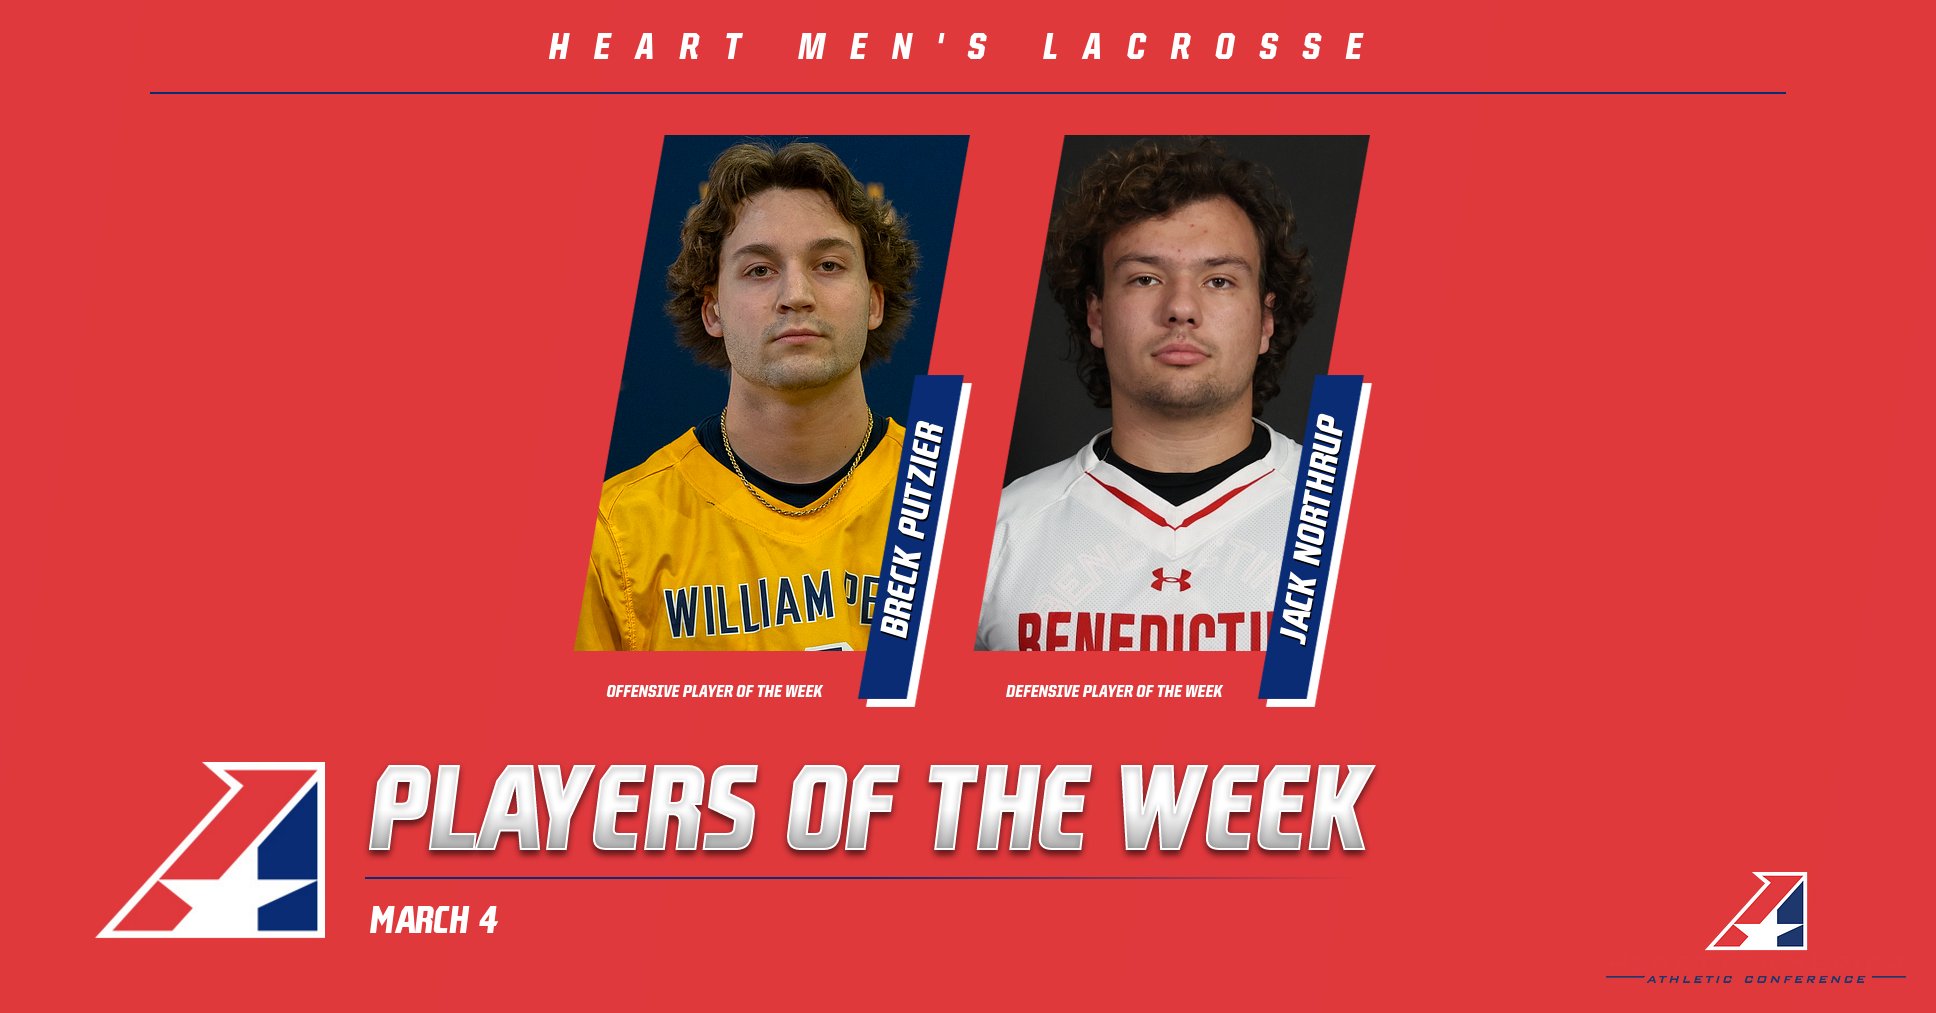 Heart Men’s Lacrosse Weekly Awards Announced – March 4